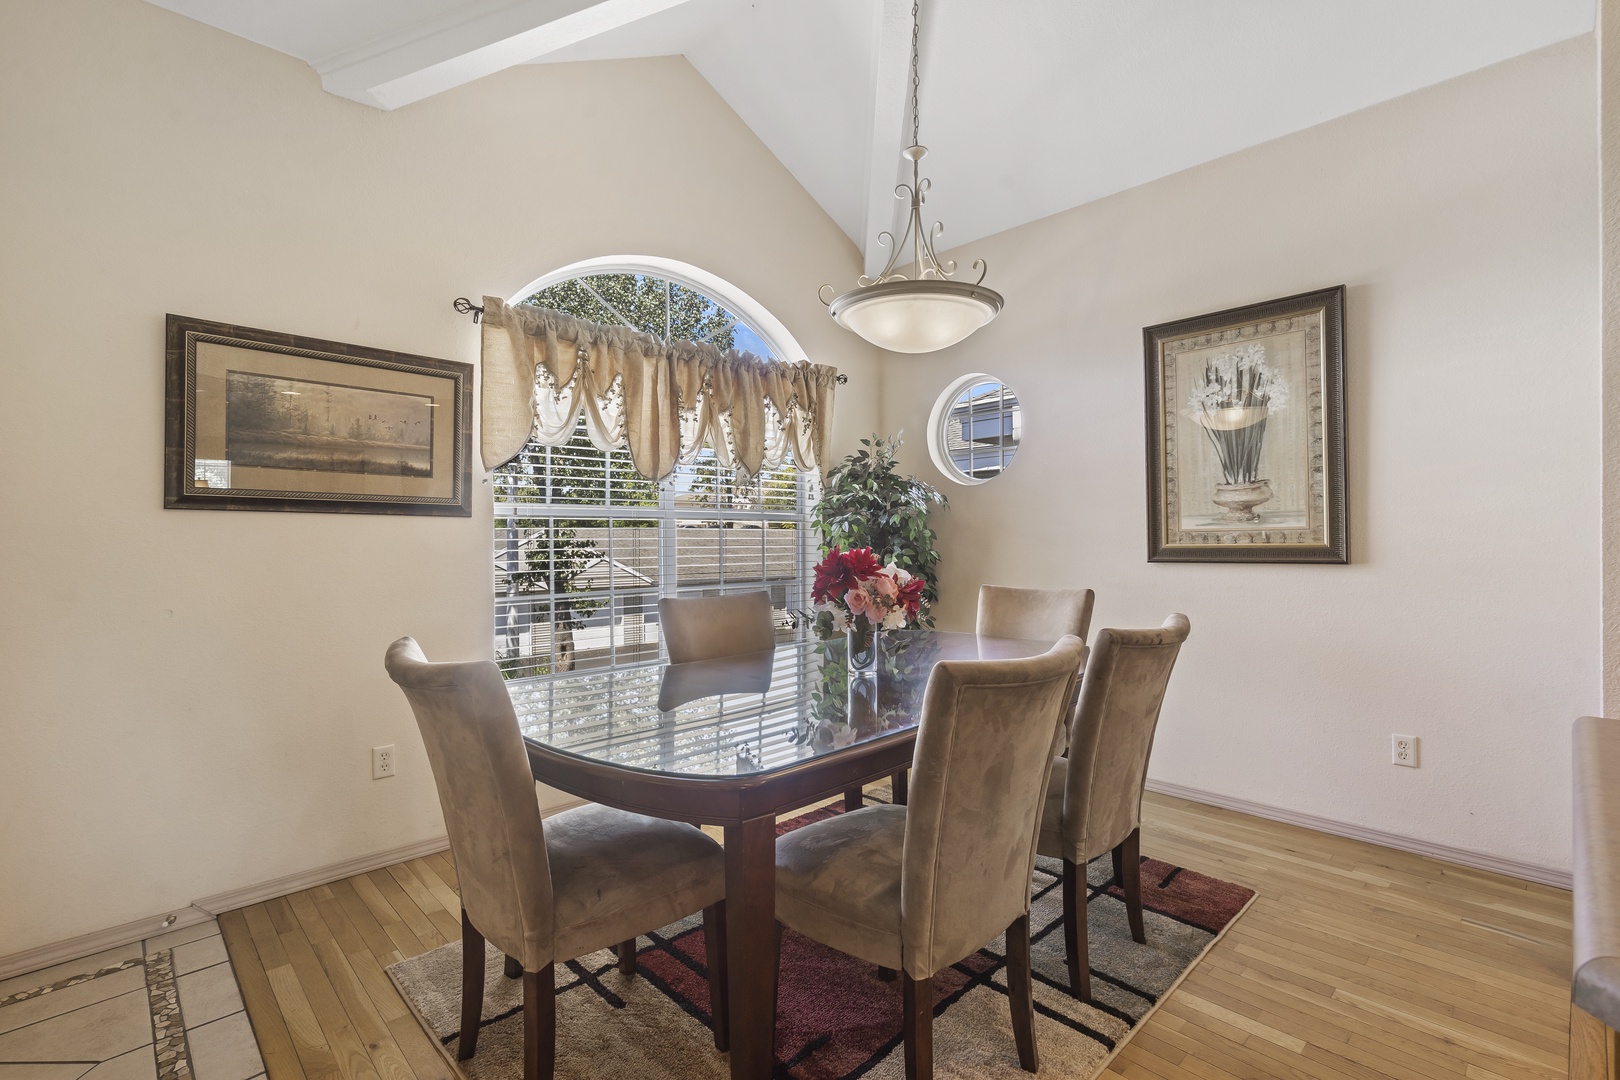 Formal dining room fit for 5